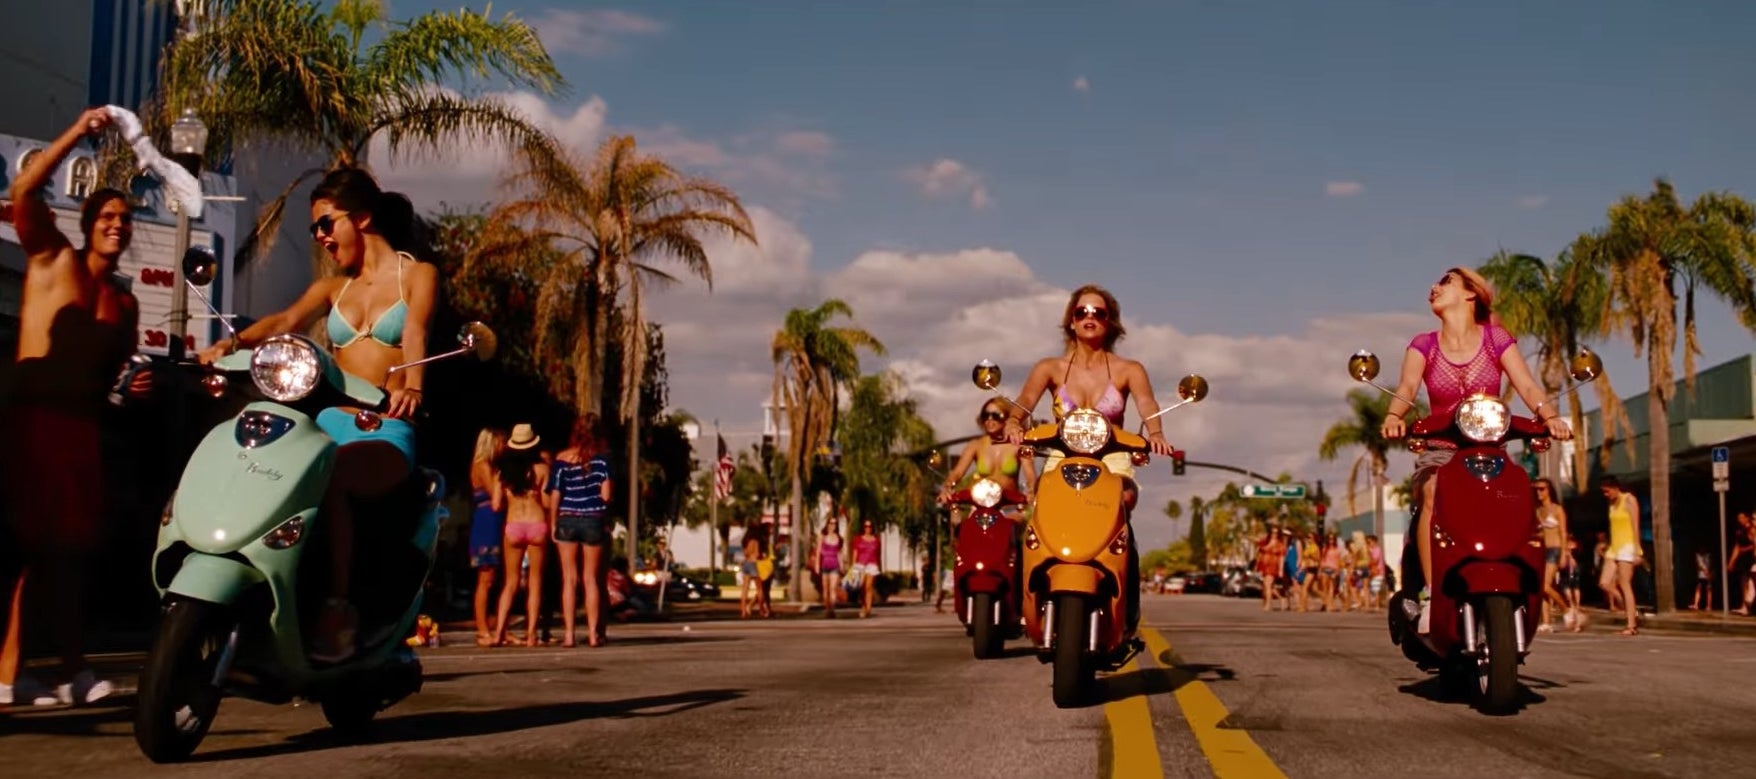 Candy, Faith, Brit, and Cotty reading motorbikes down a street in &quot;Spring Breakers&quot;